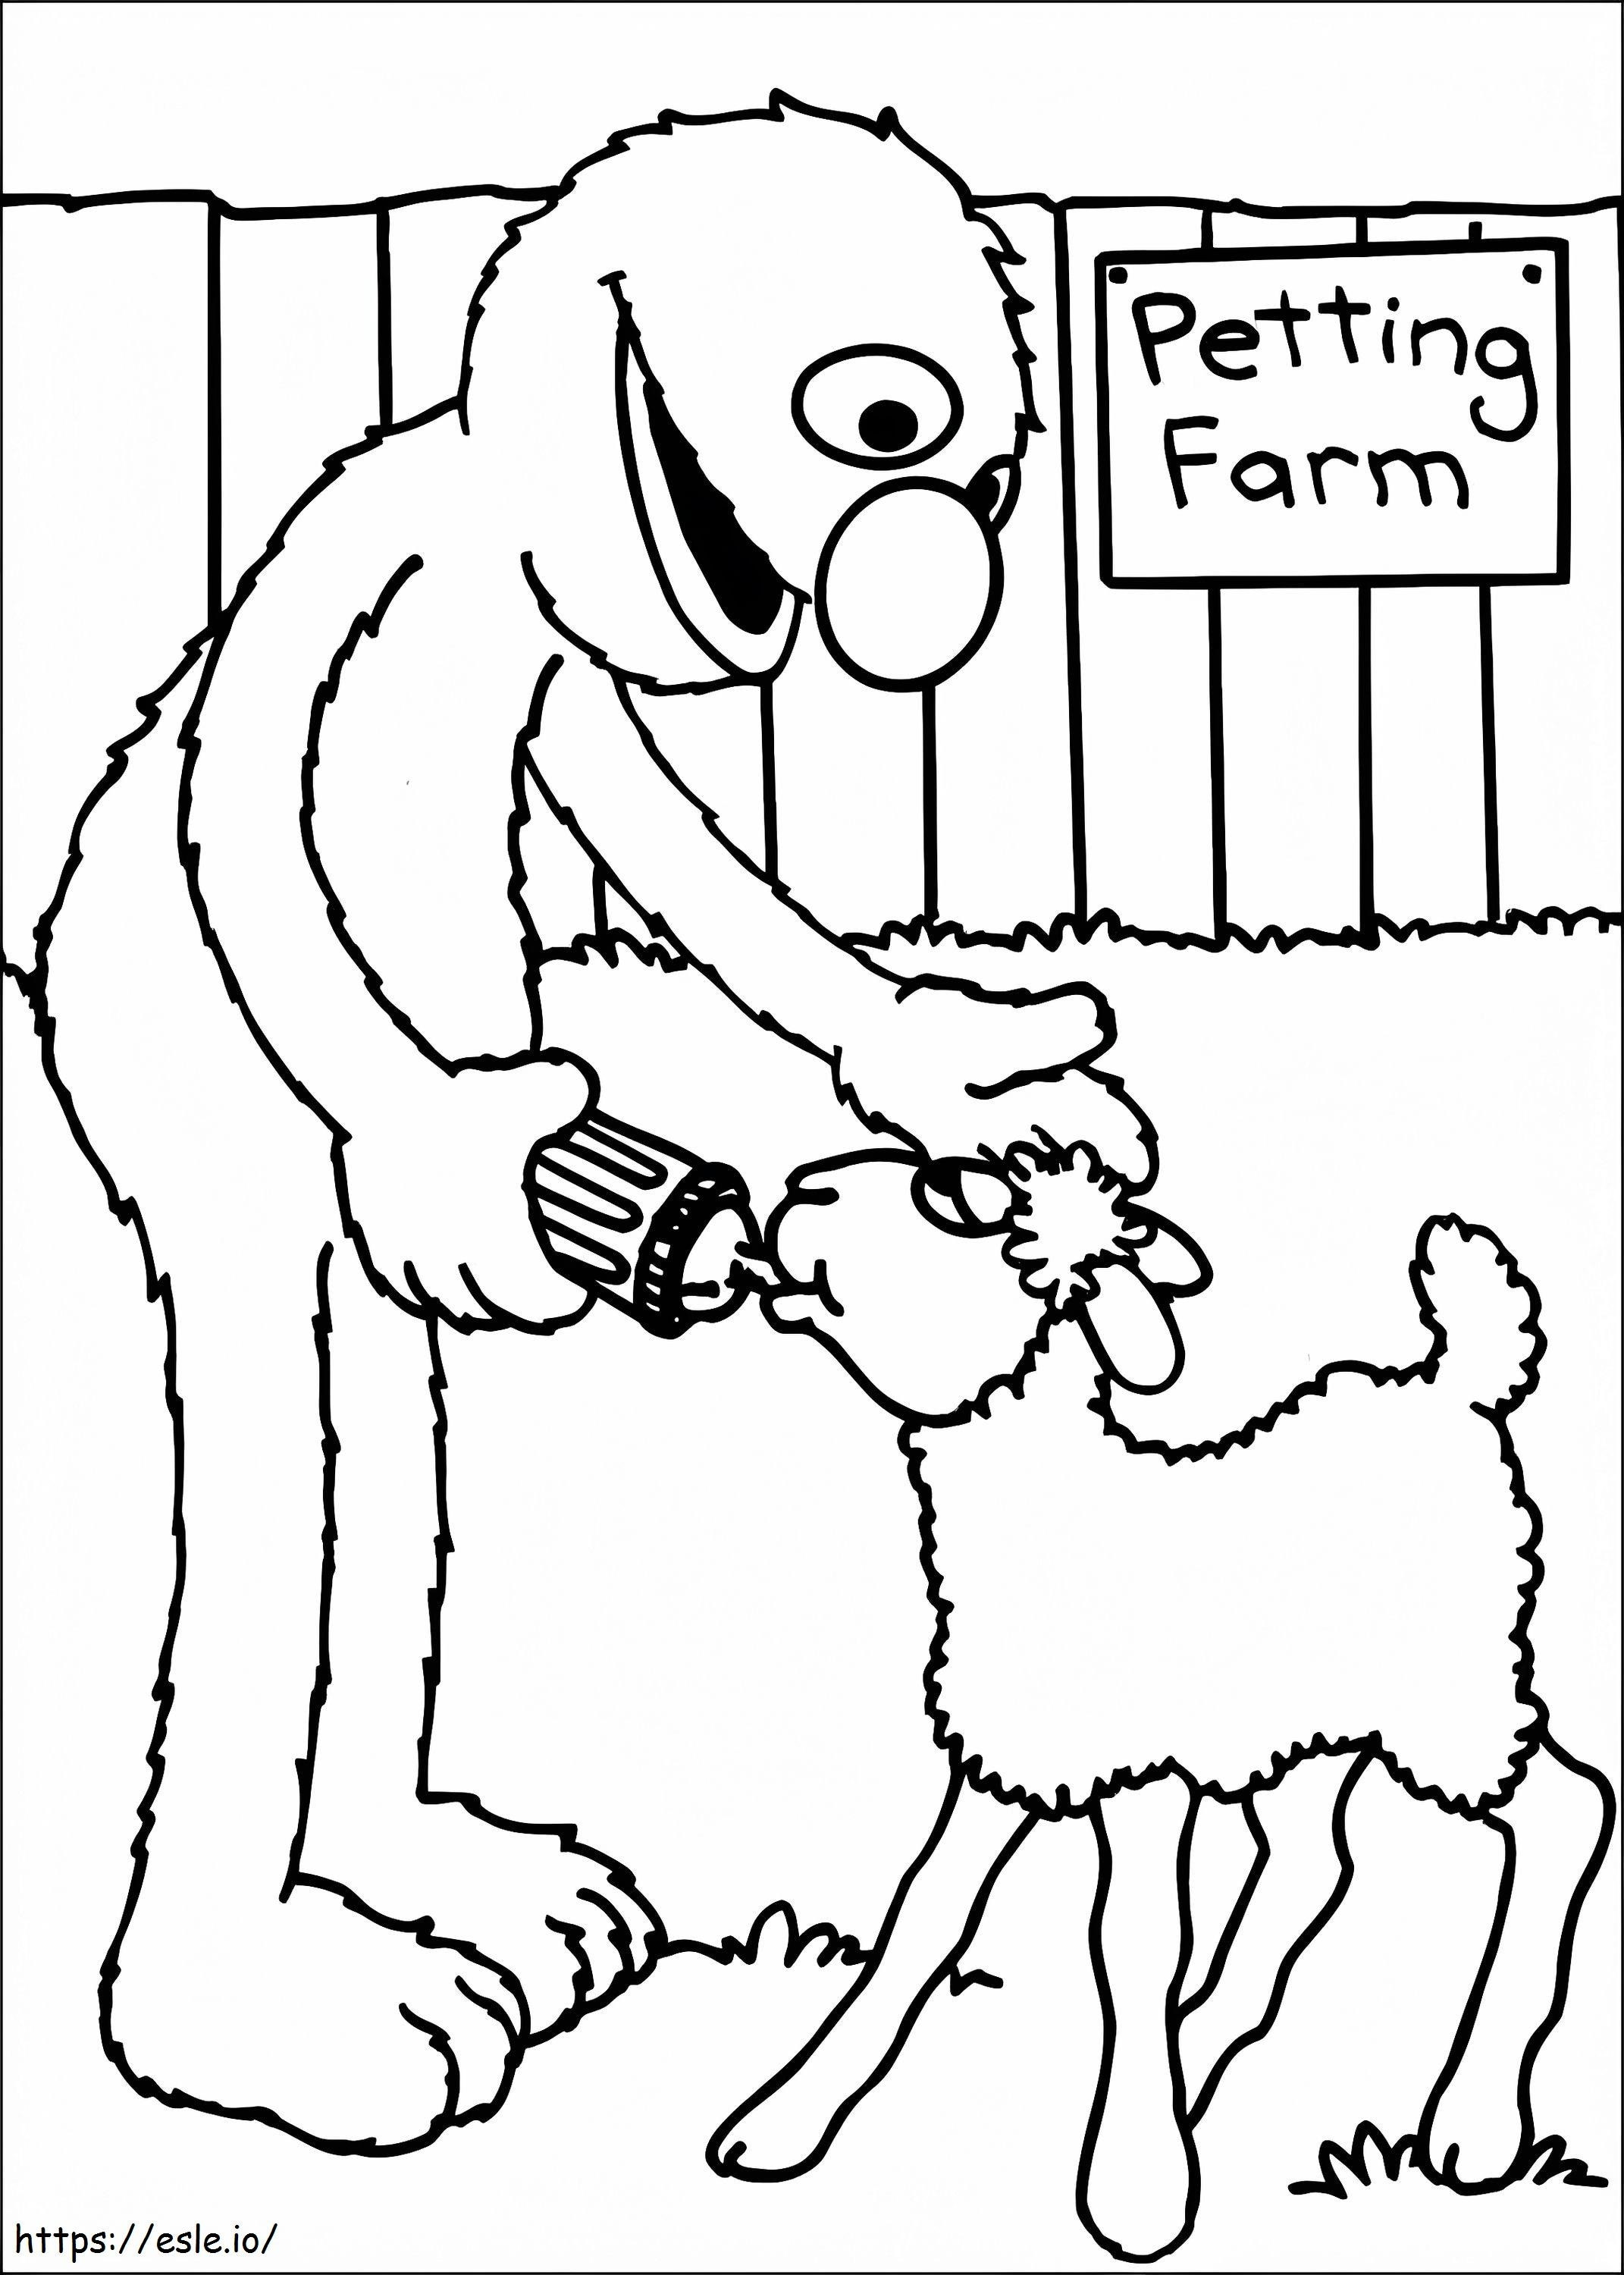 Printable Grover Sesame Street coloring page